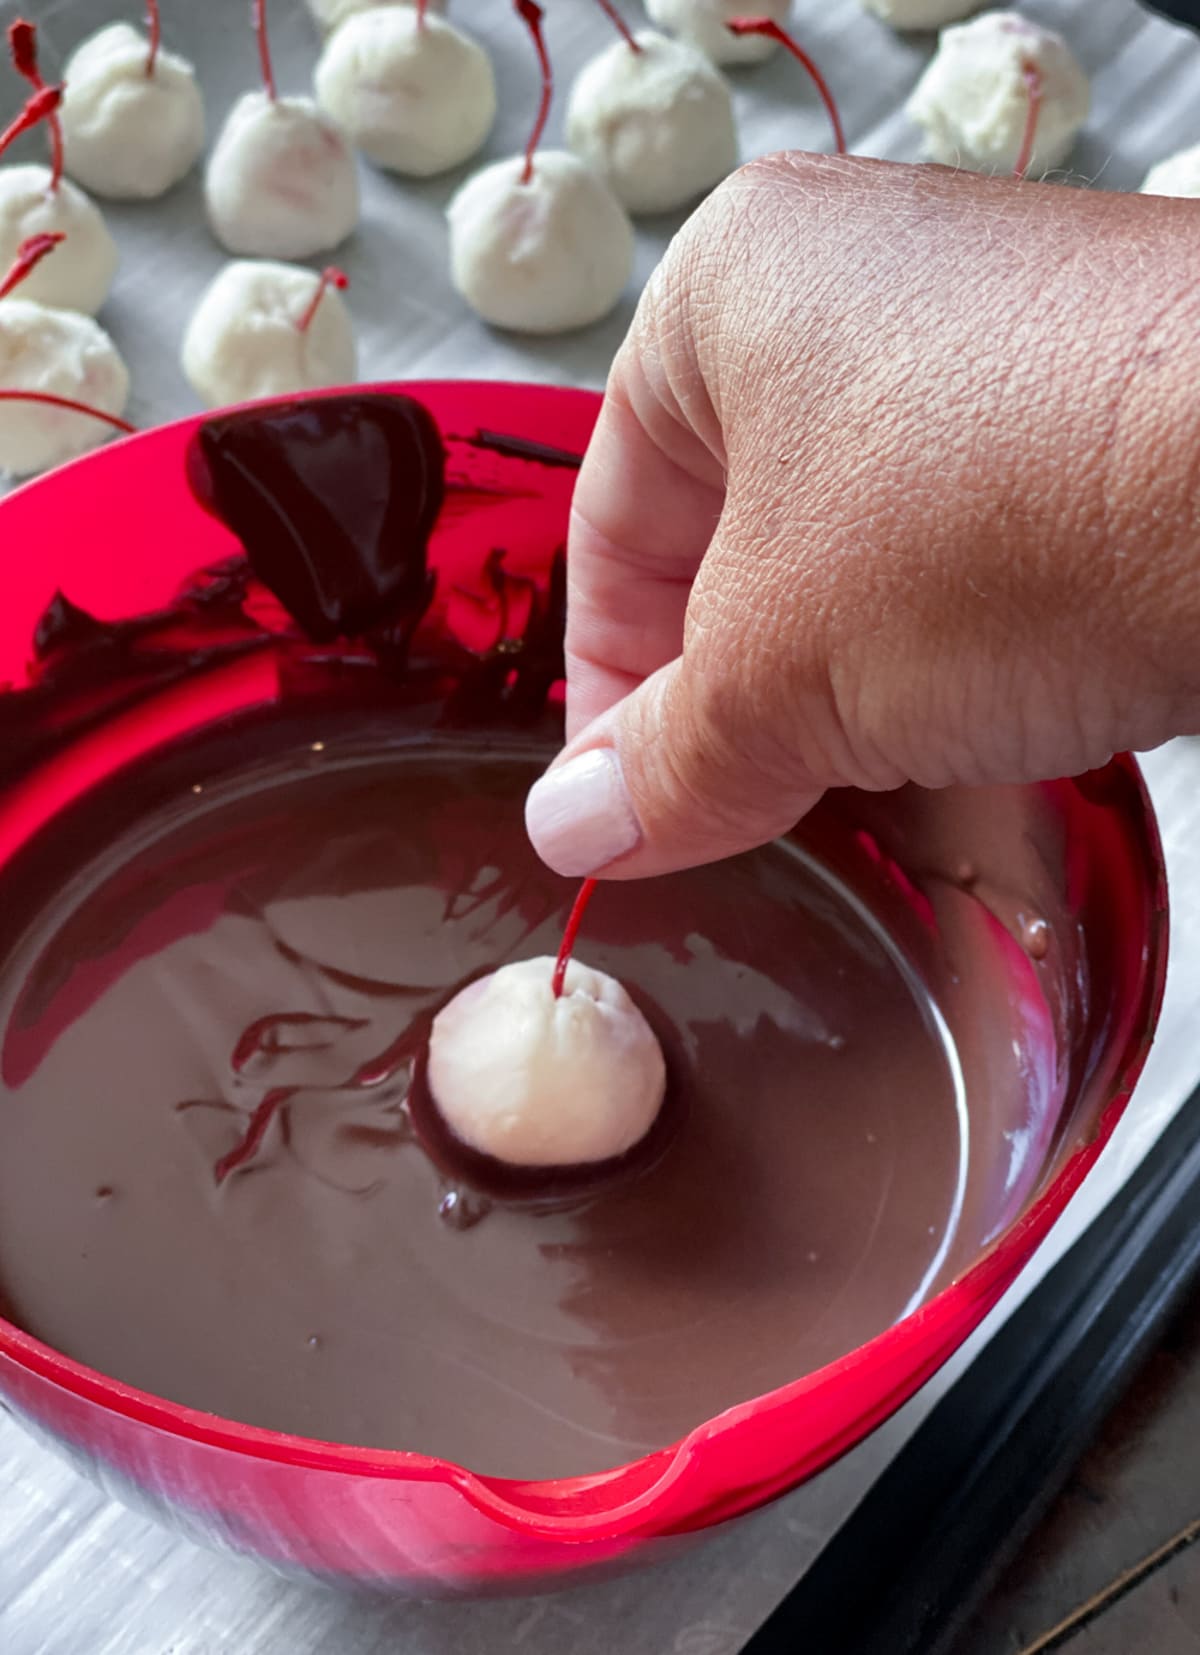 A cherry covered in white fondant being dipped into melted chocolate